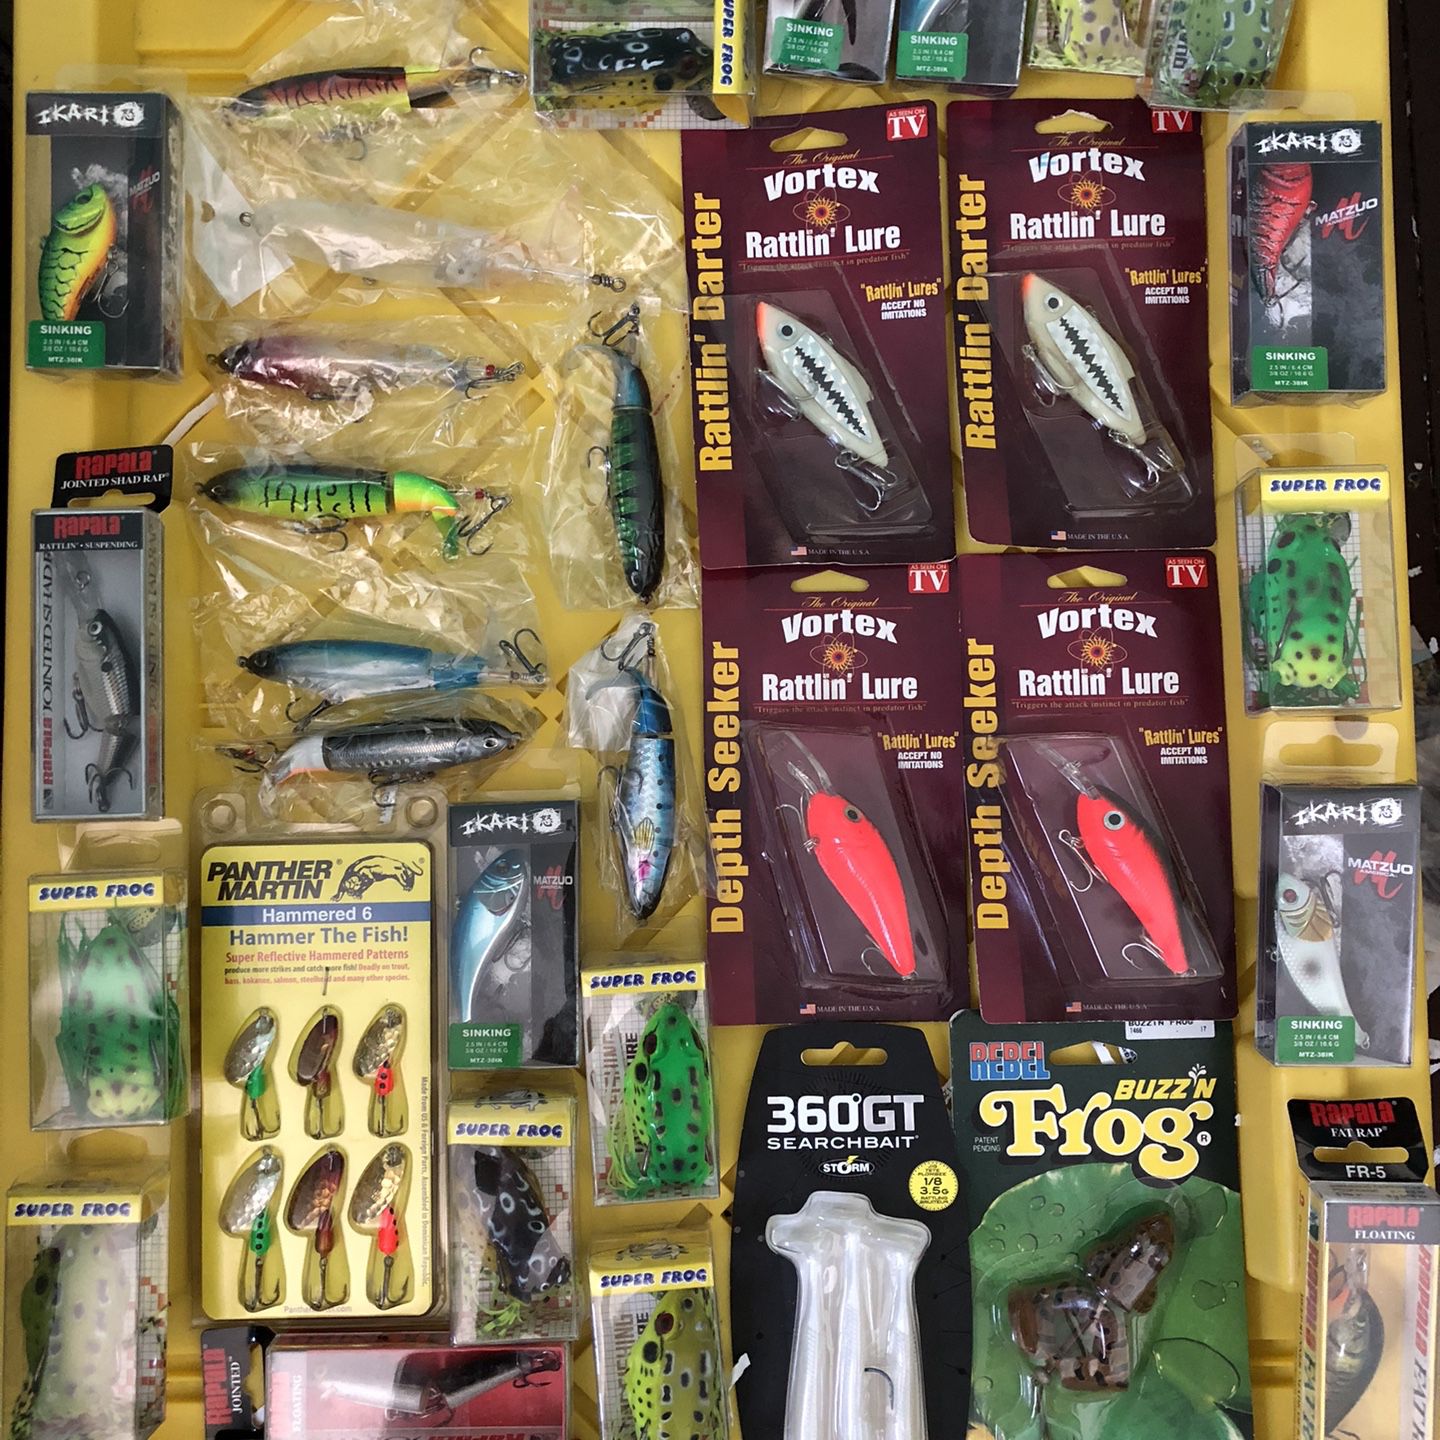 41 brand new bass fishing lures for Sale in Galveston, TX - OfferUp